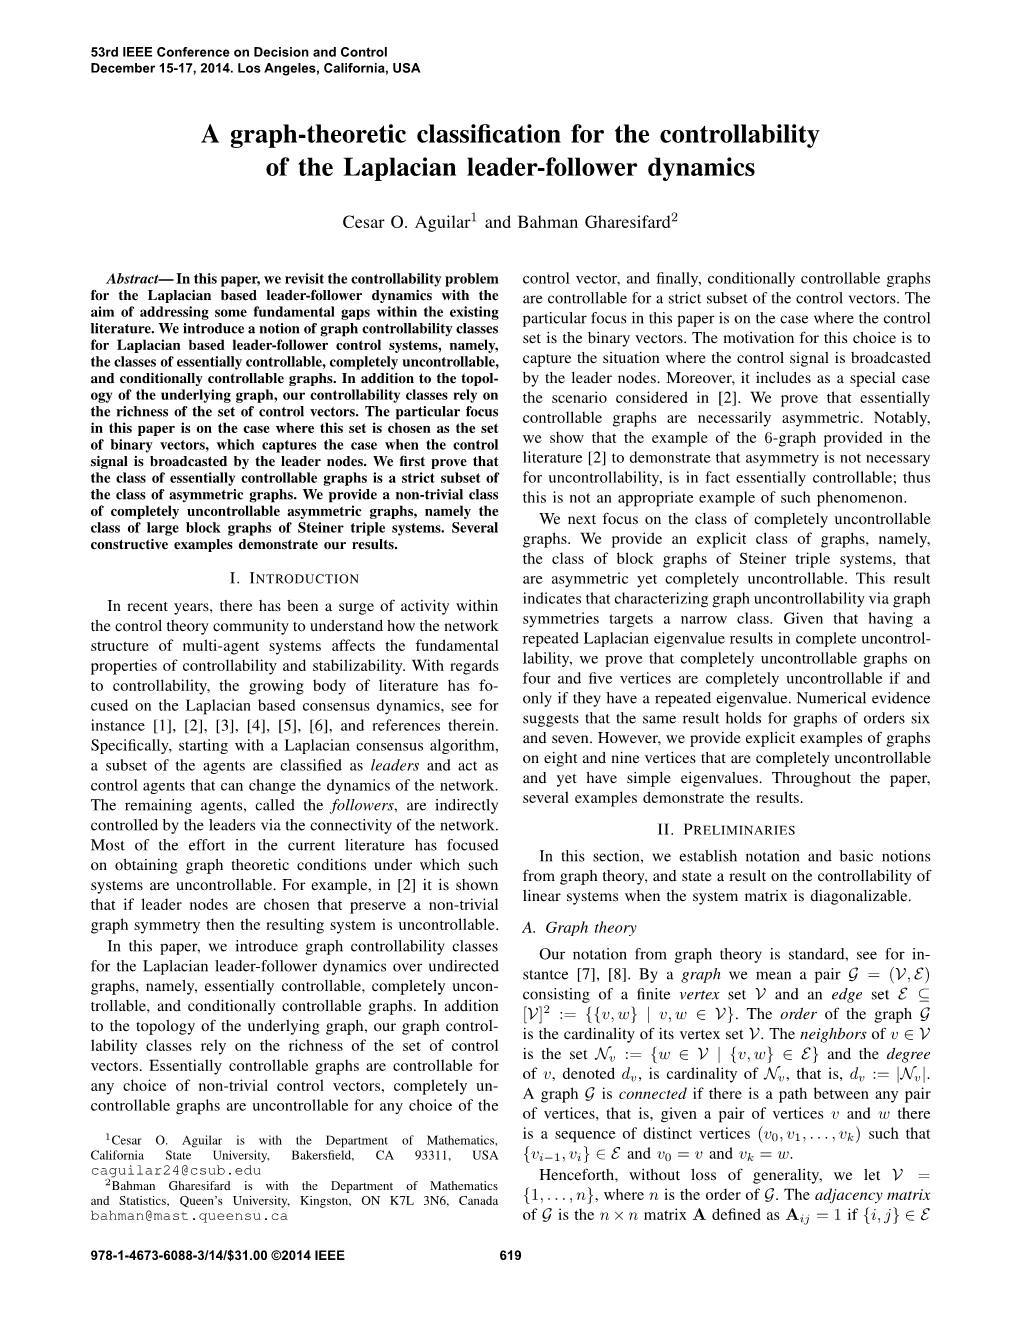 A Graph-Theoretic Classification for the Controllability of the Laplacian